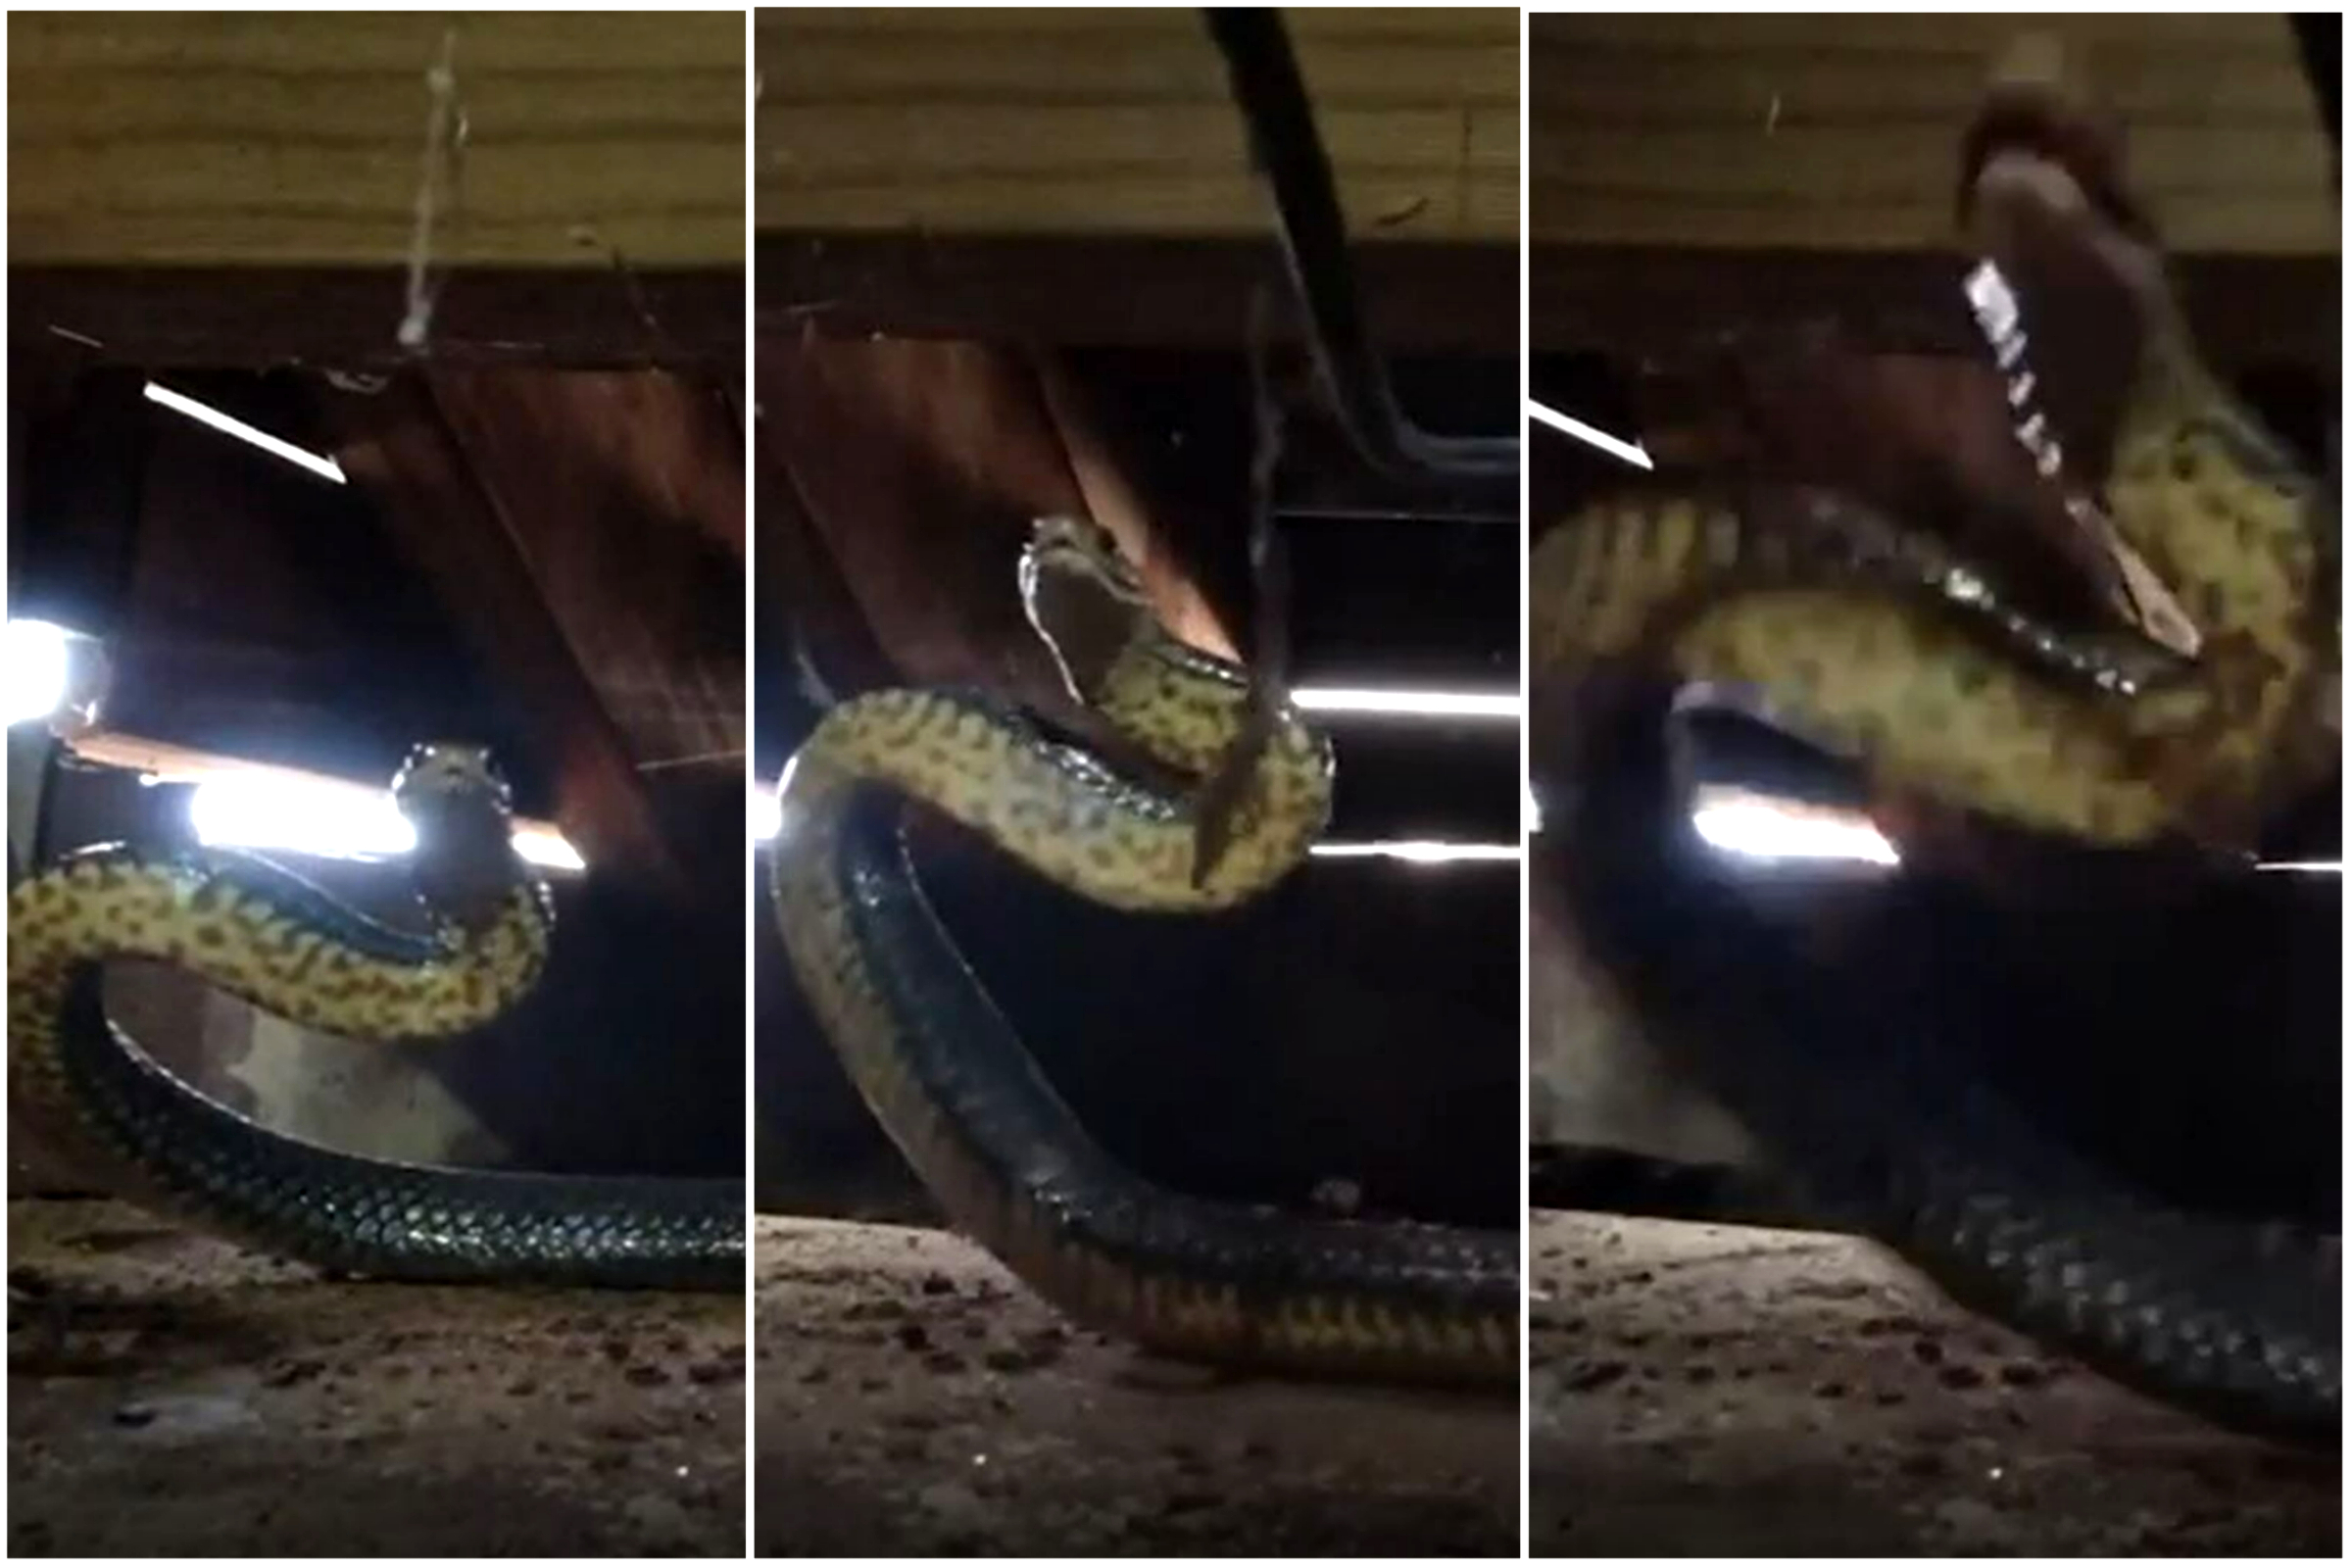 Watch Moment World's Second Deadliest Snake Lunges at Man in a Crawl Space